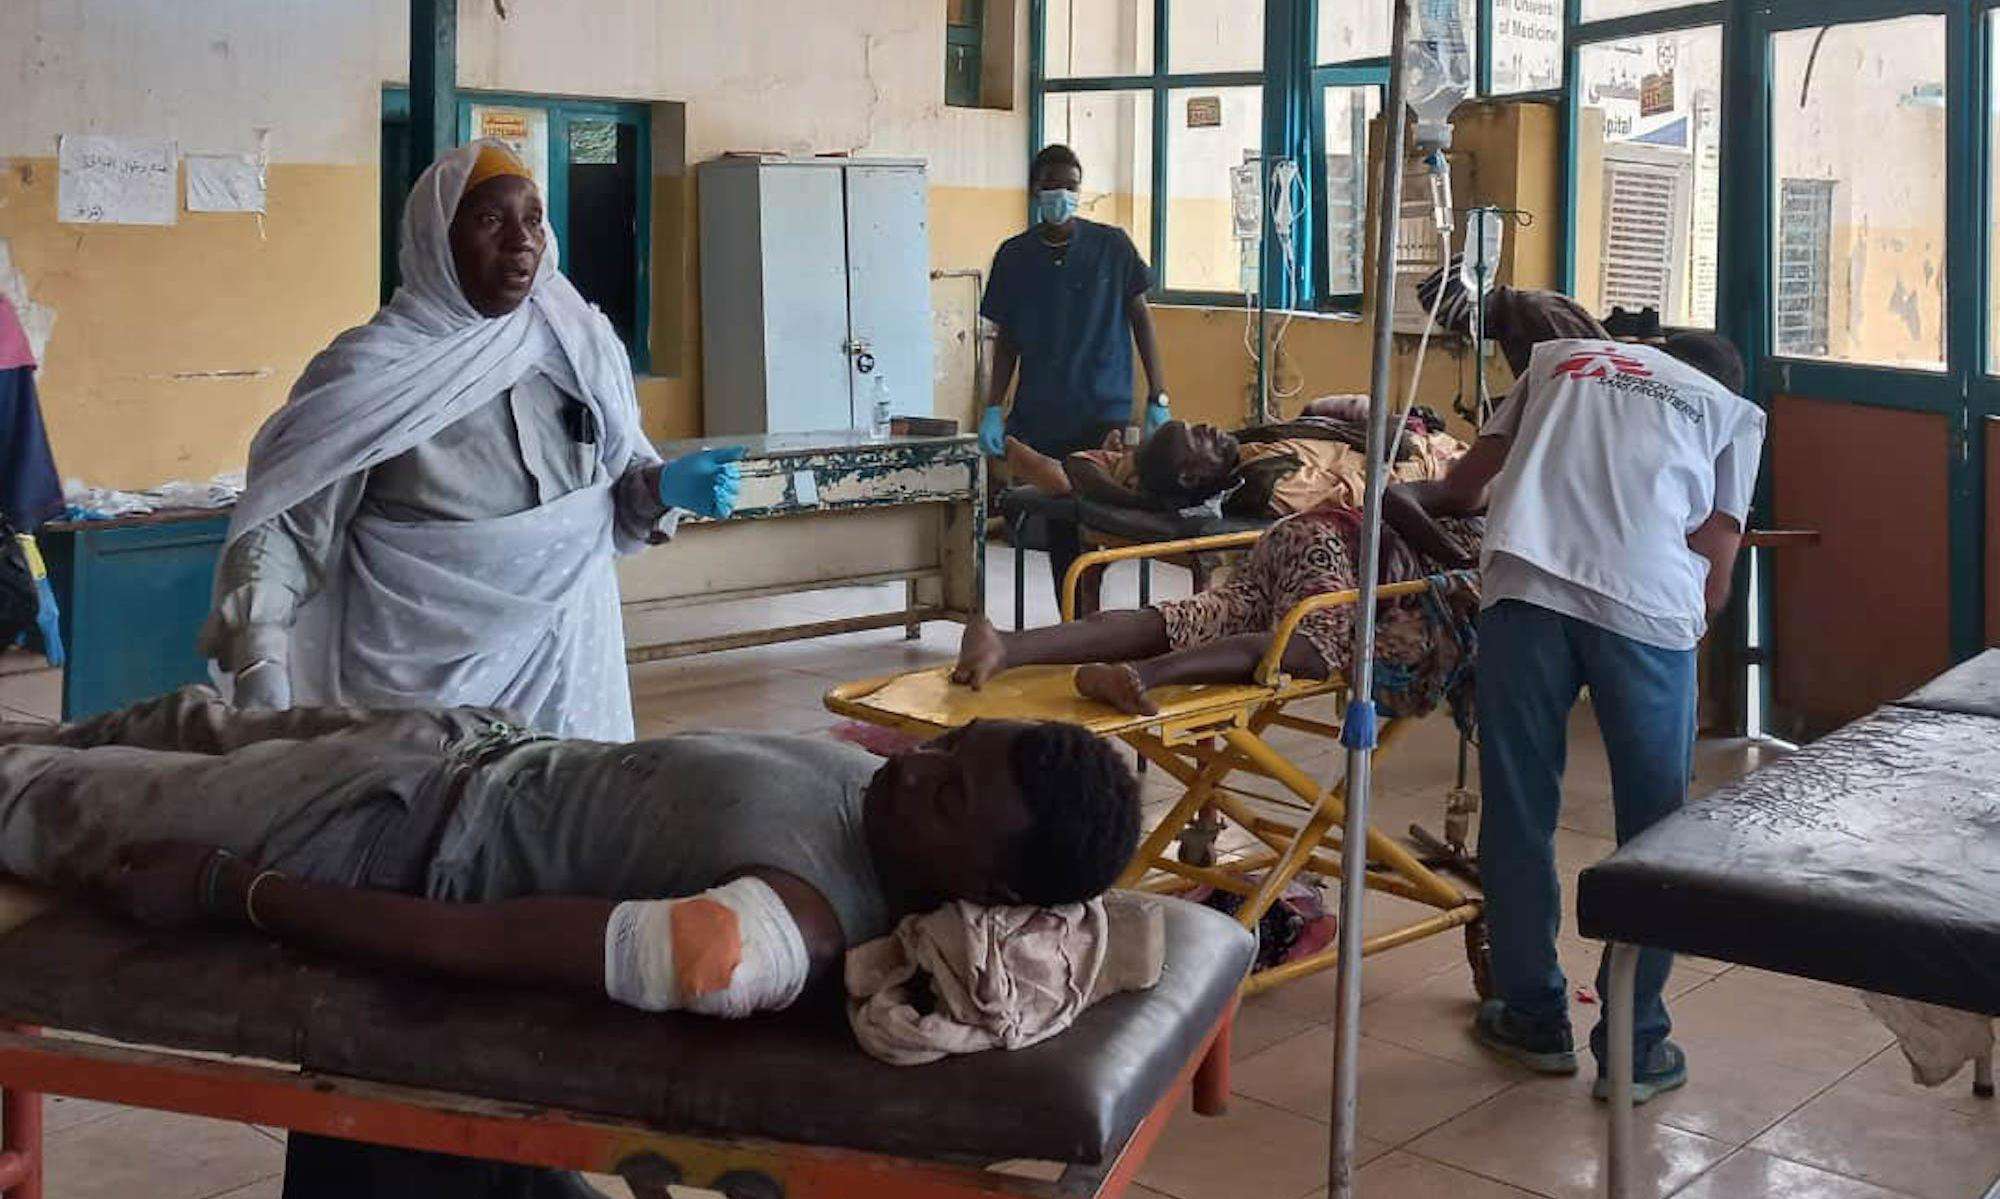 An MSF hospital room with patients on gurneys in Khartoum, Sudan.